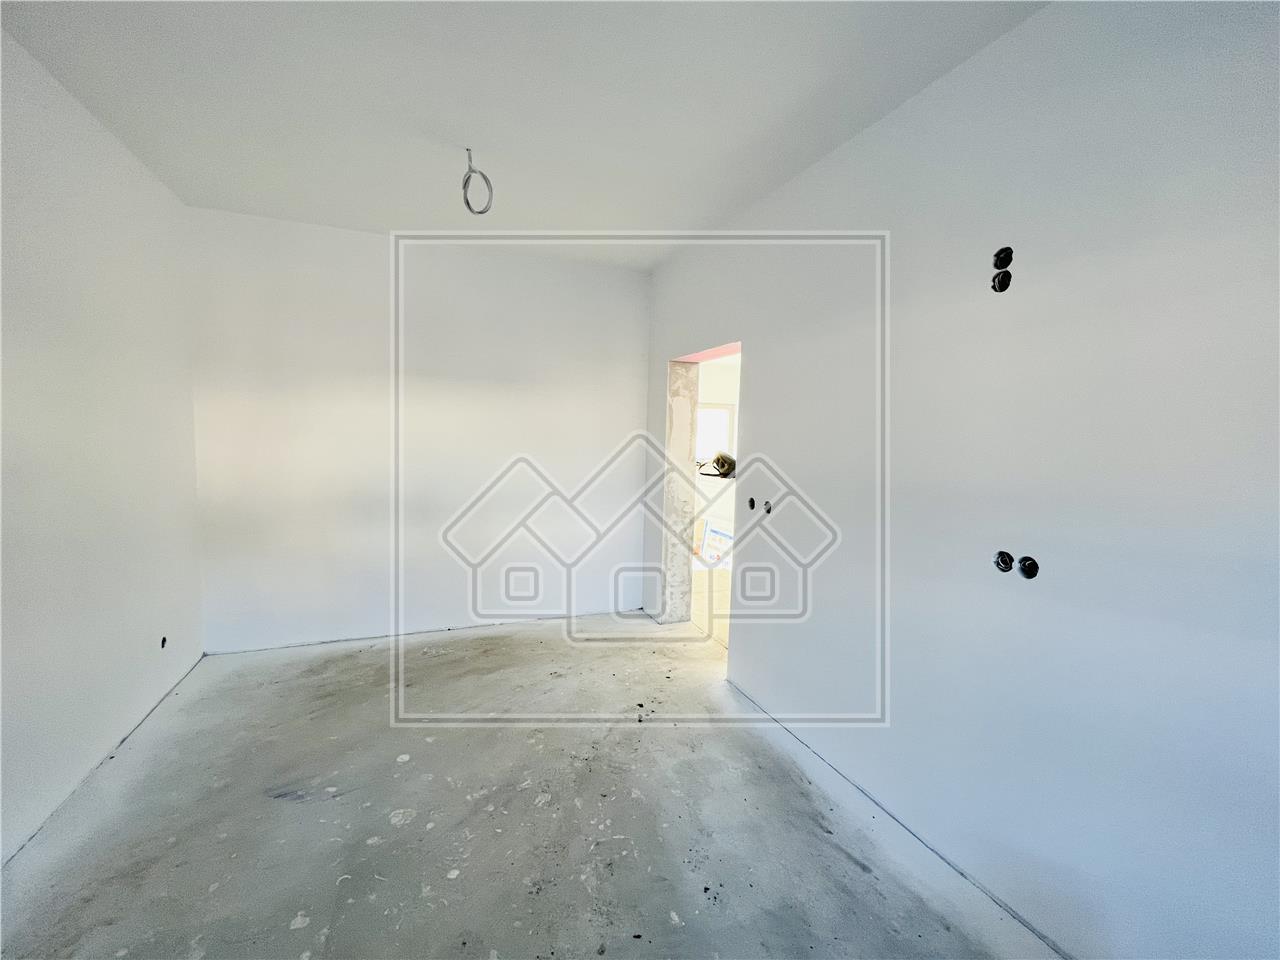 House for sale in Sibiu - duplex type - 146 usable sqm - white deliver